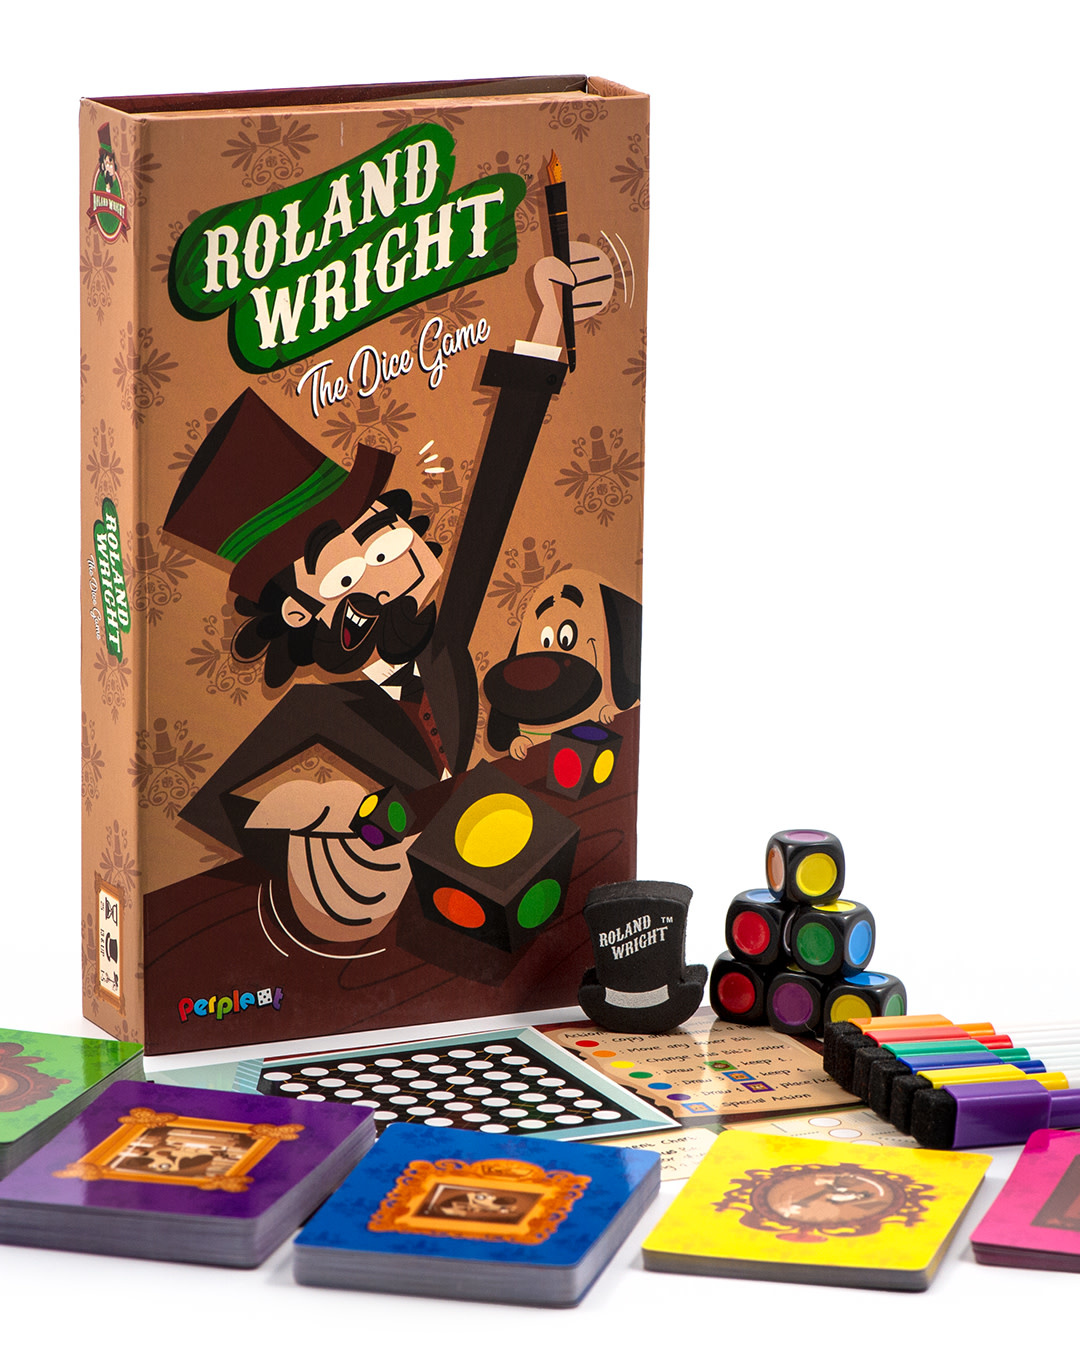 Roland Wright: The Dice Game (EN)